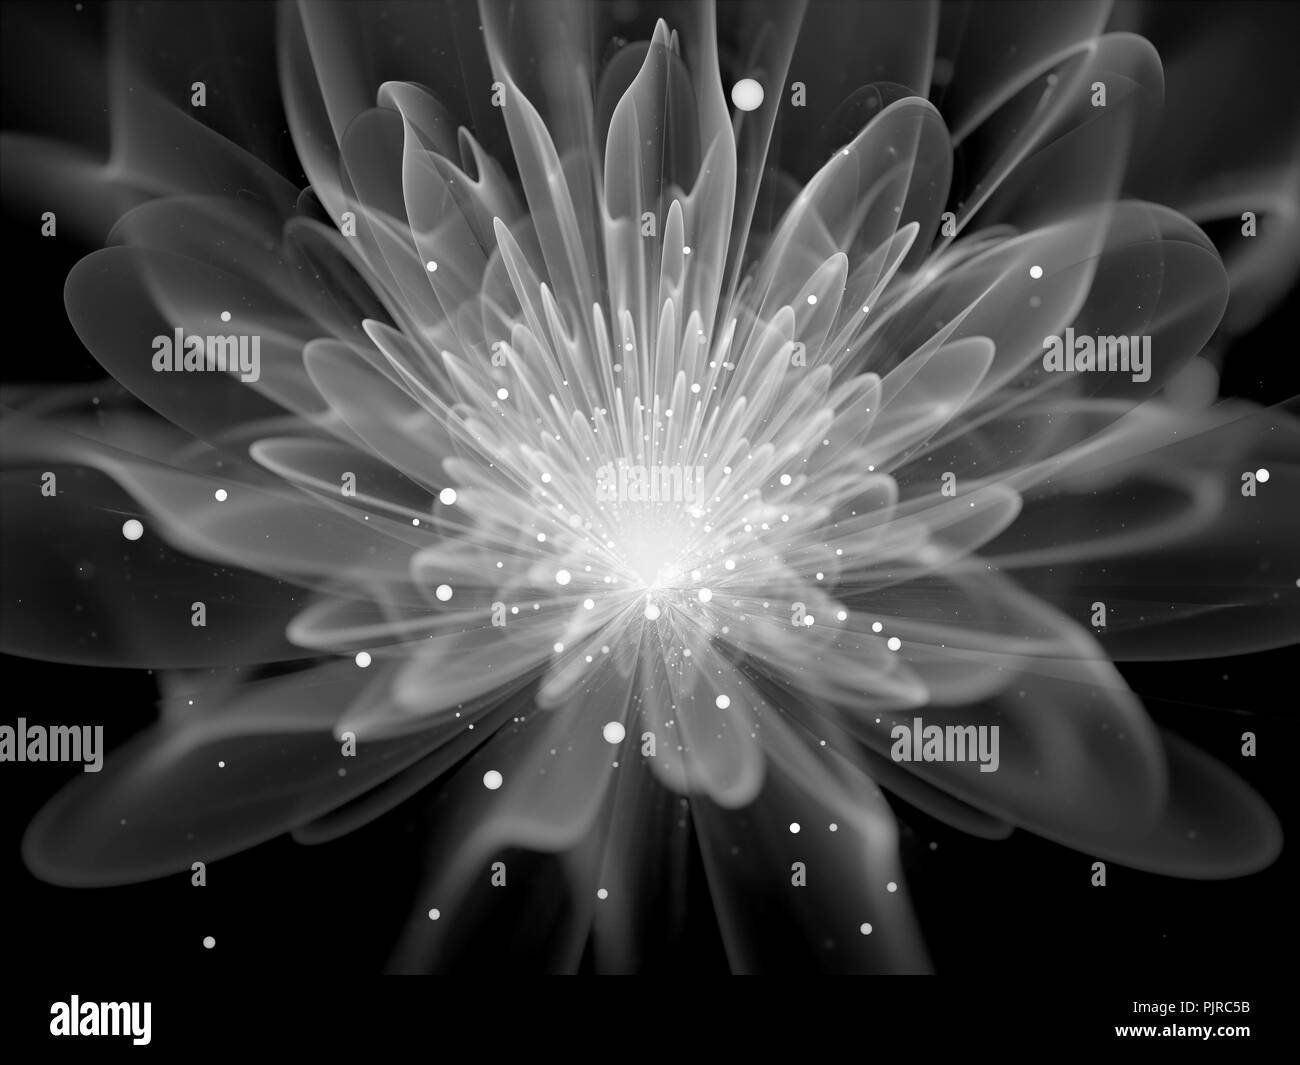 Glowing fractal flower black and white, computer generated abstract background, 3D rendering Stock Photo